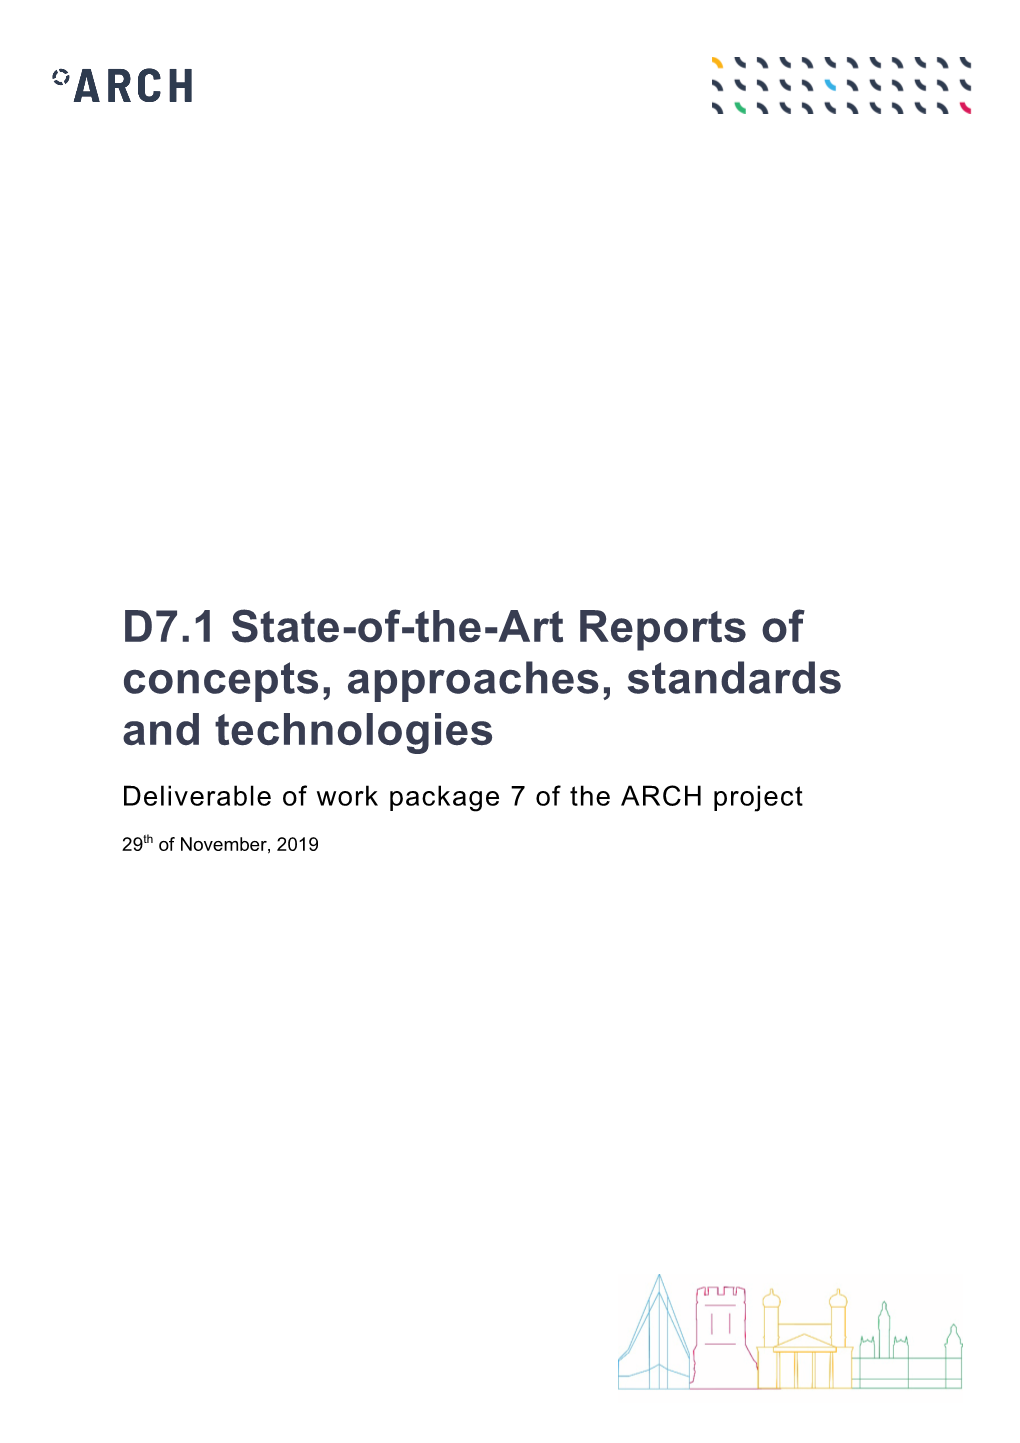 D7.1 State-Of-The-Art Reports of Concepts, Approaches, Standards and Technologies